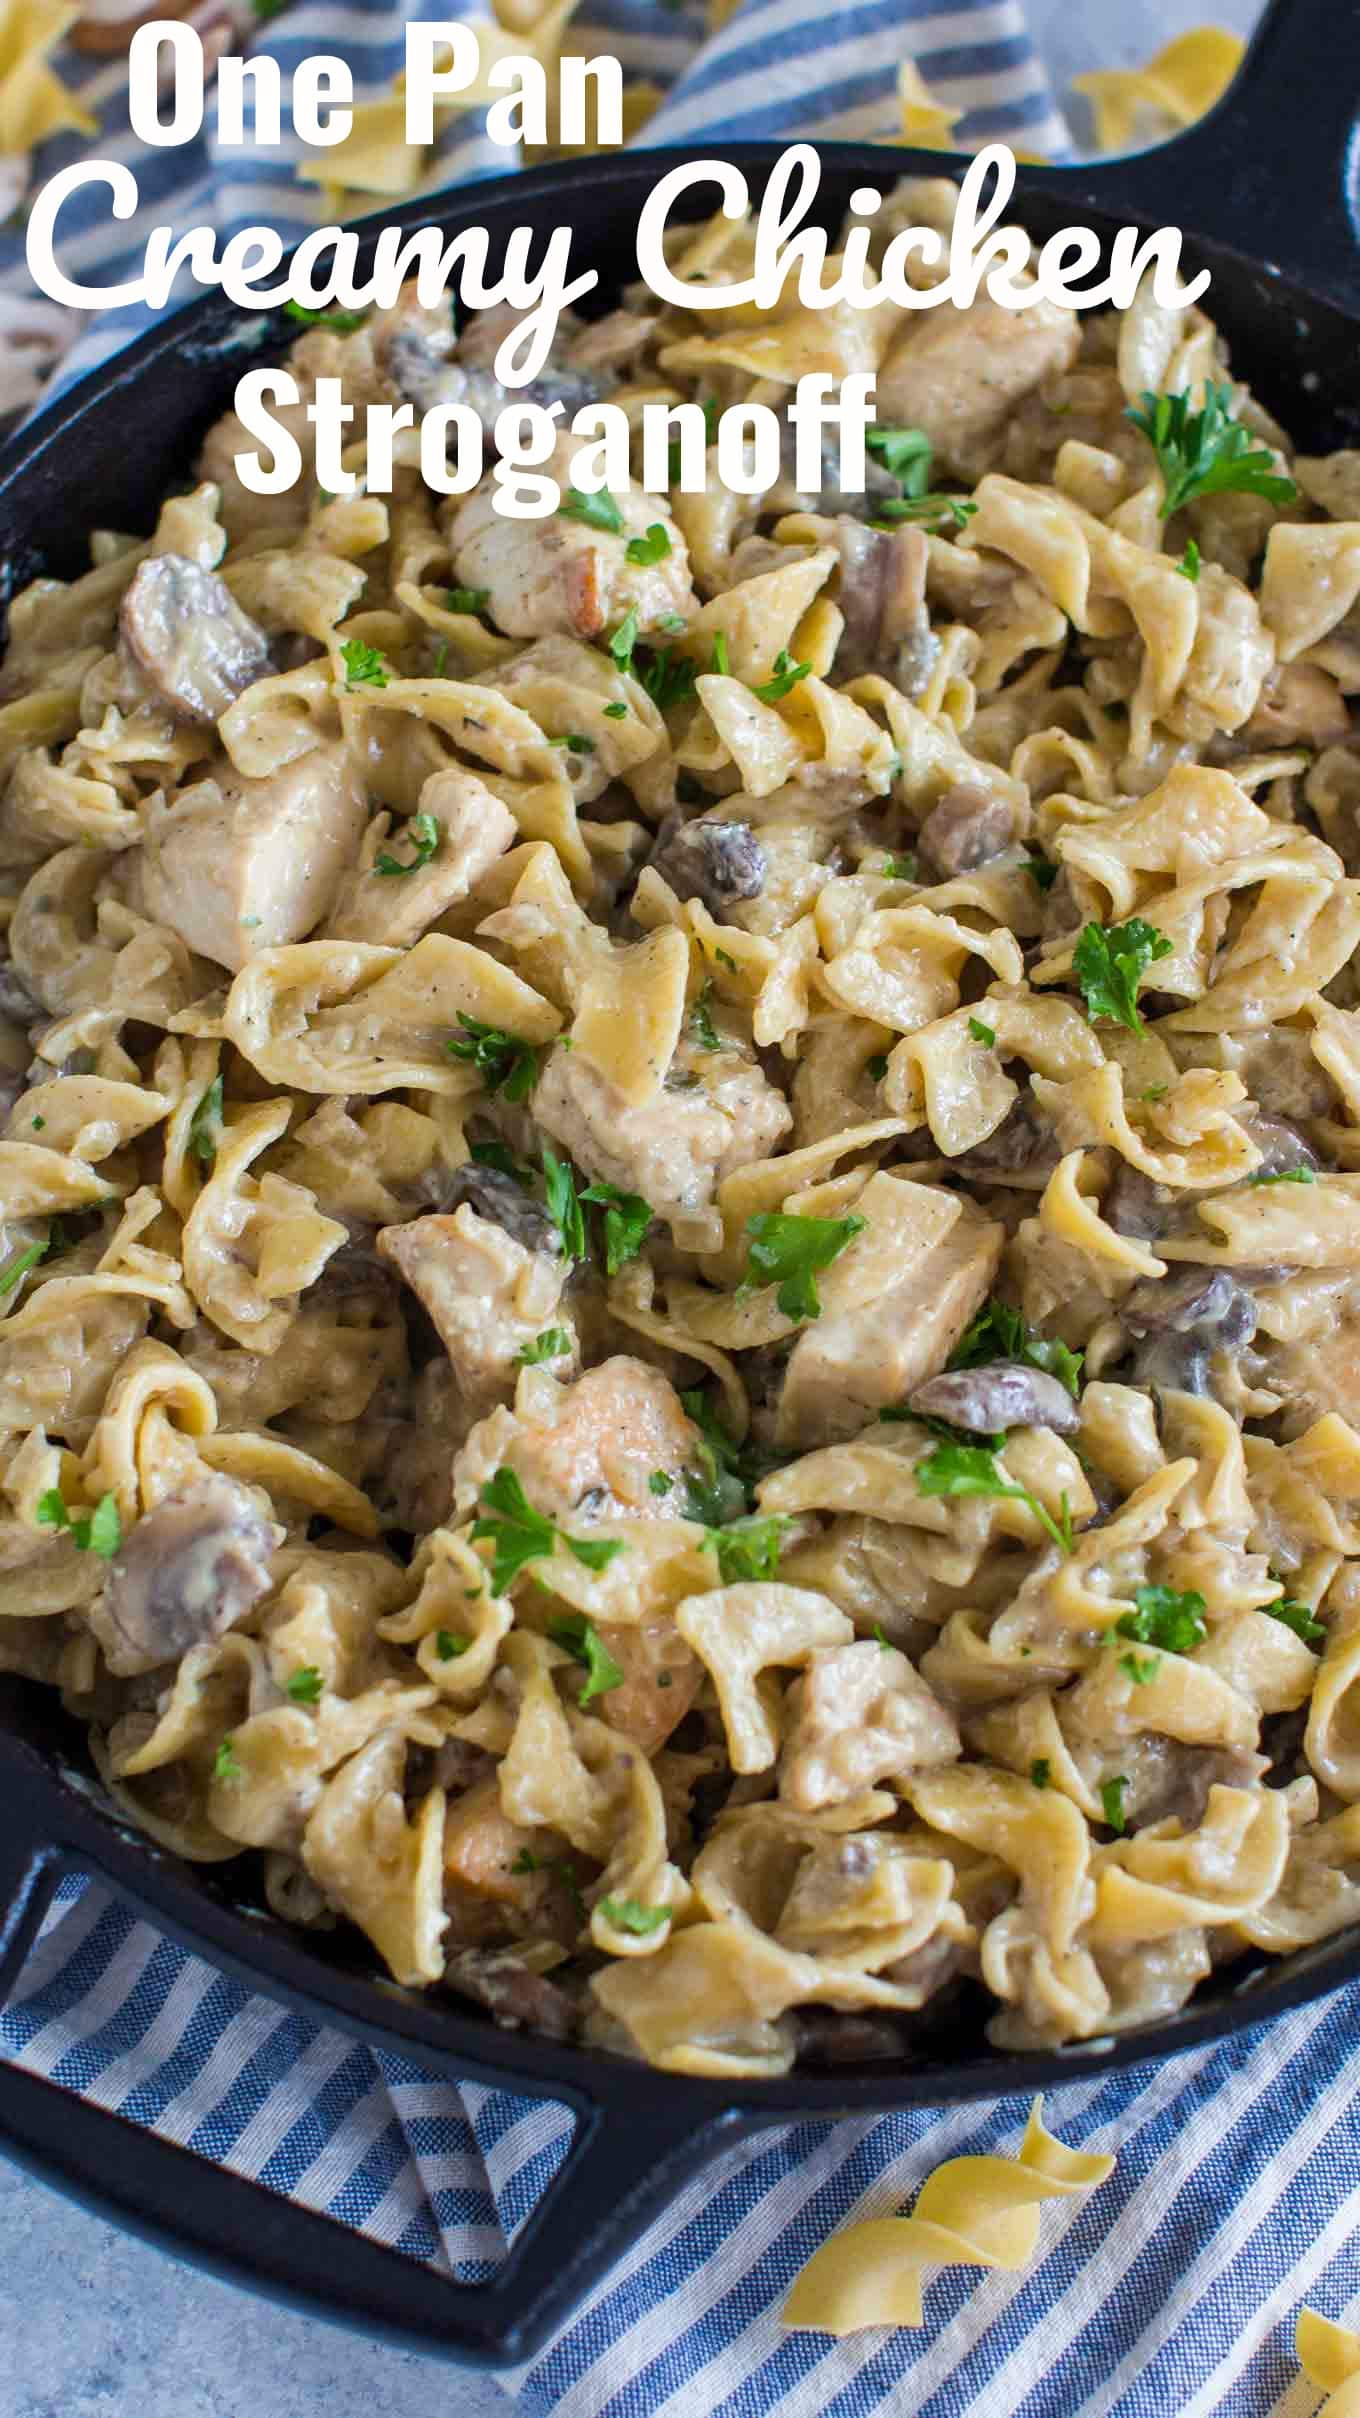 Chicken Stroganoff is creamy and hearty, loaded with thick egg noodles and juicy mushrooms. This easy weeknight dinner is ready in about 30 minutes. #30minutemeals #pastarecipes #chickenrecipes